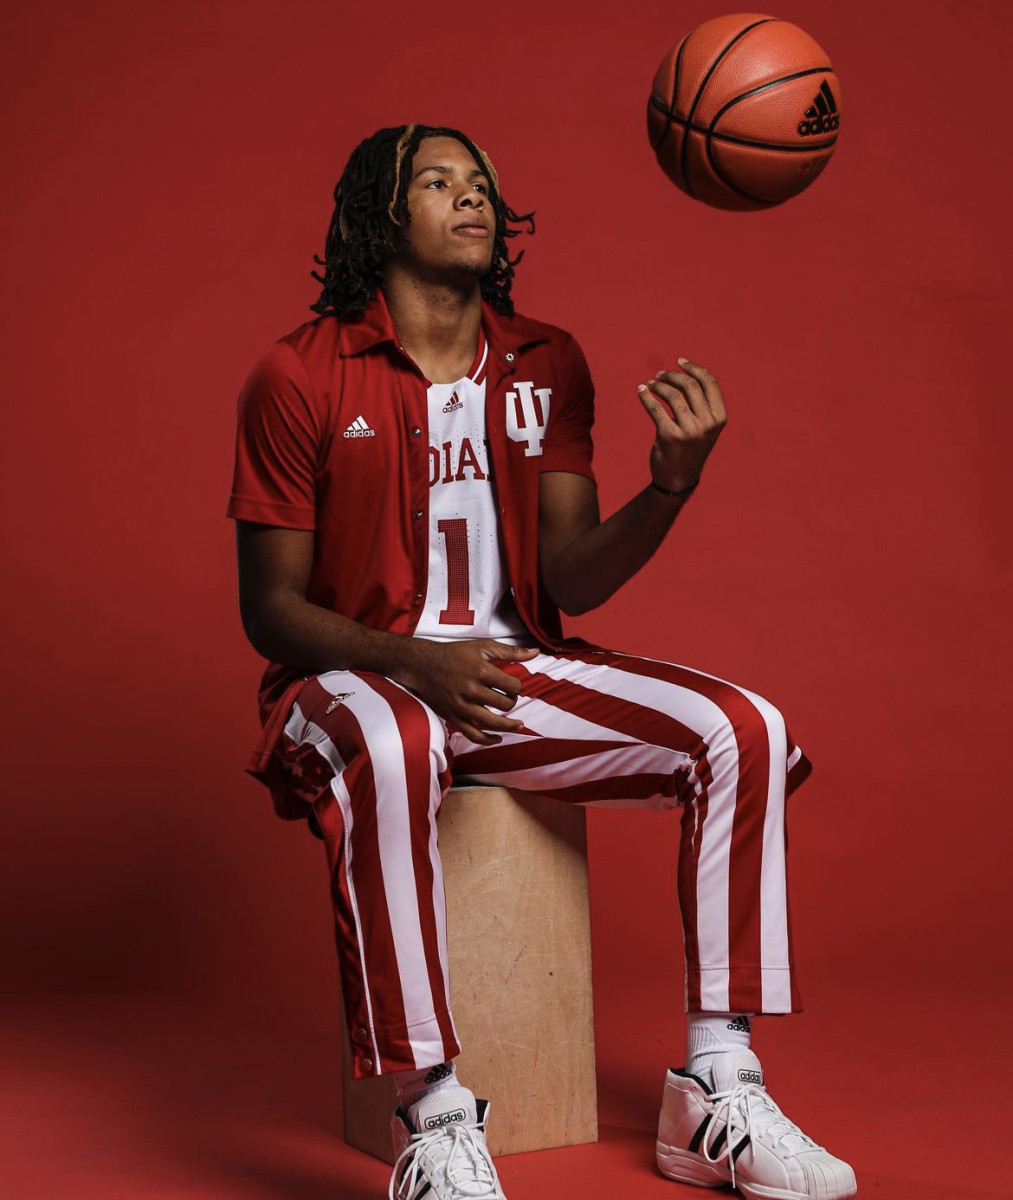 Trey McKenney pictured during his unofficial visit to Indiana on Oct. 7, 2022.